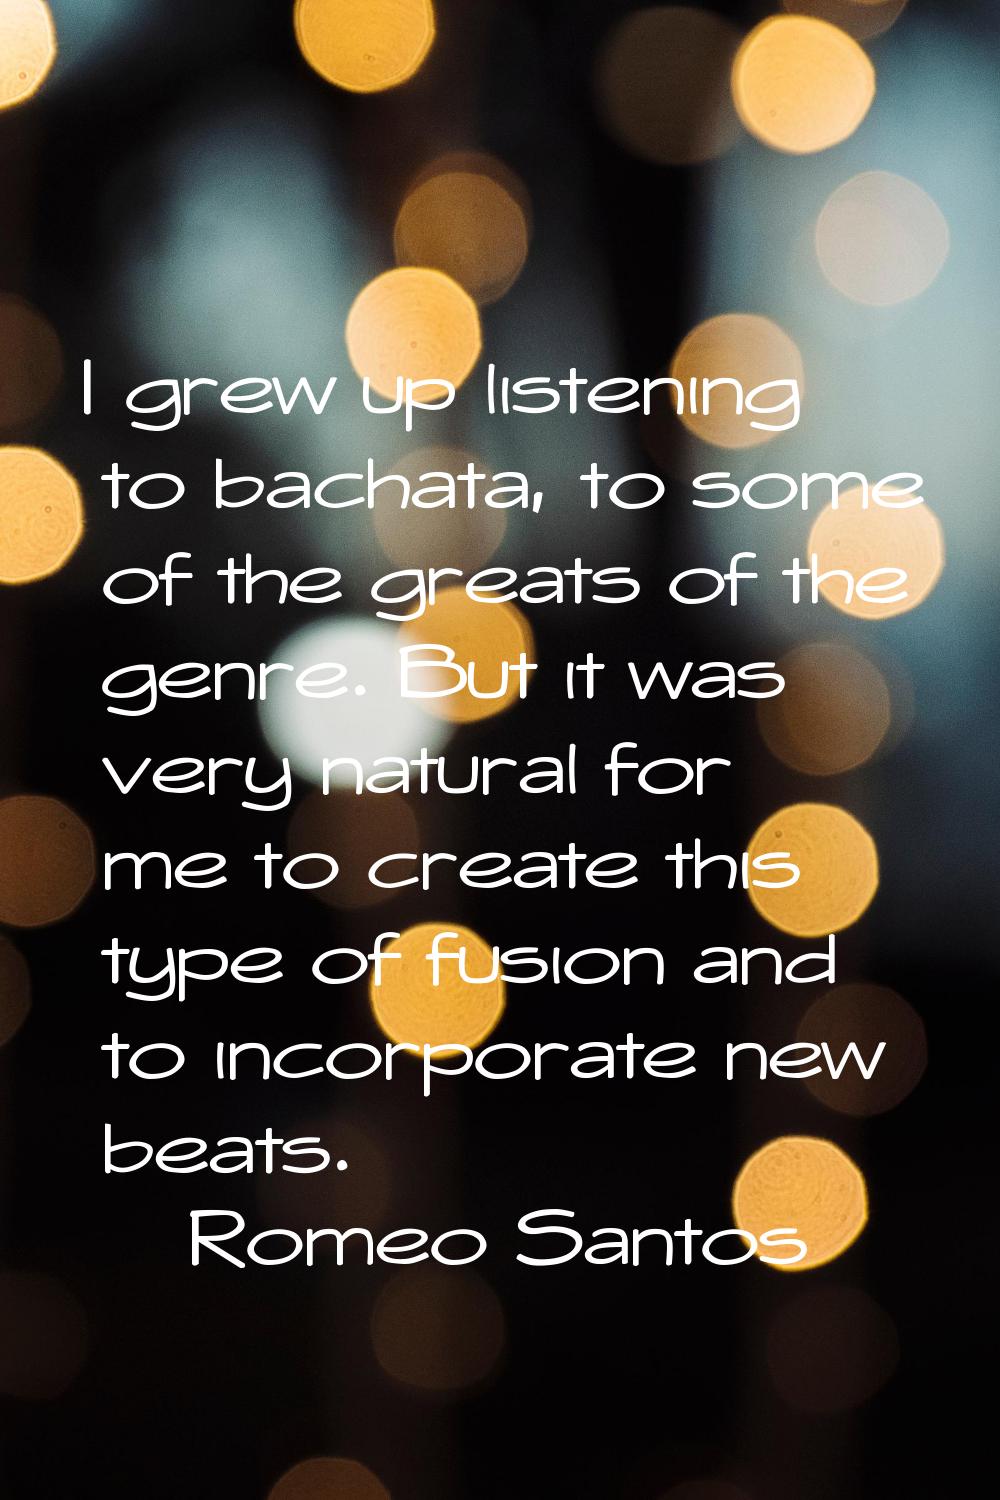 I grew up listening to bachata, to some of the greats of the genre. But it was very natural for me 